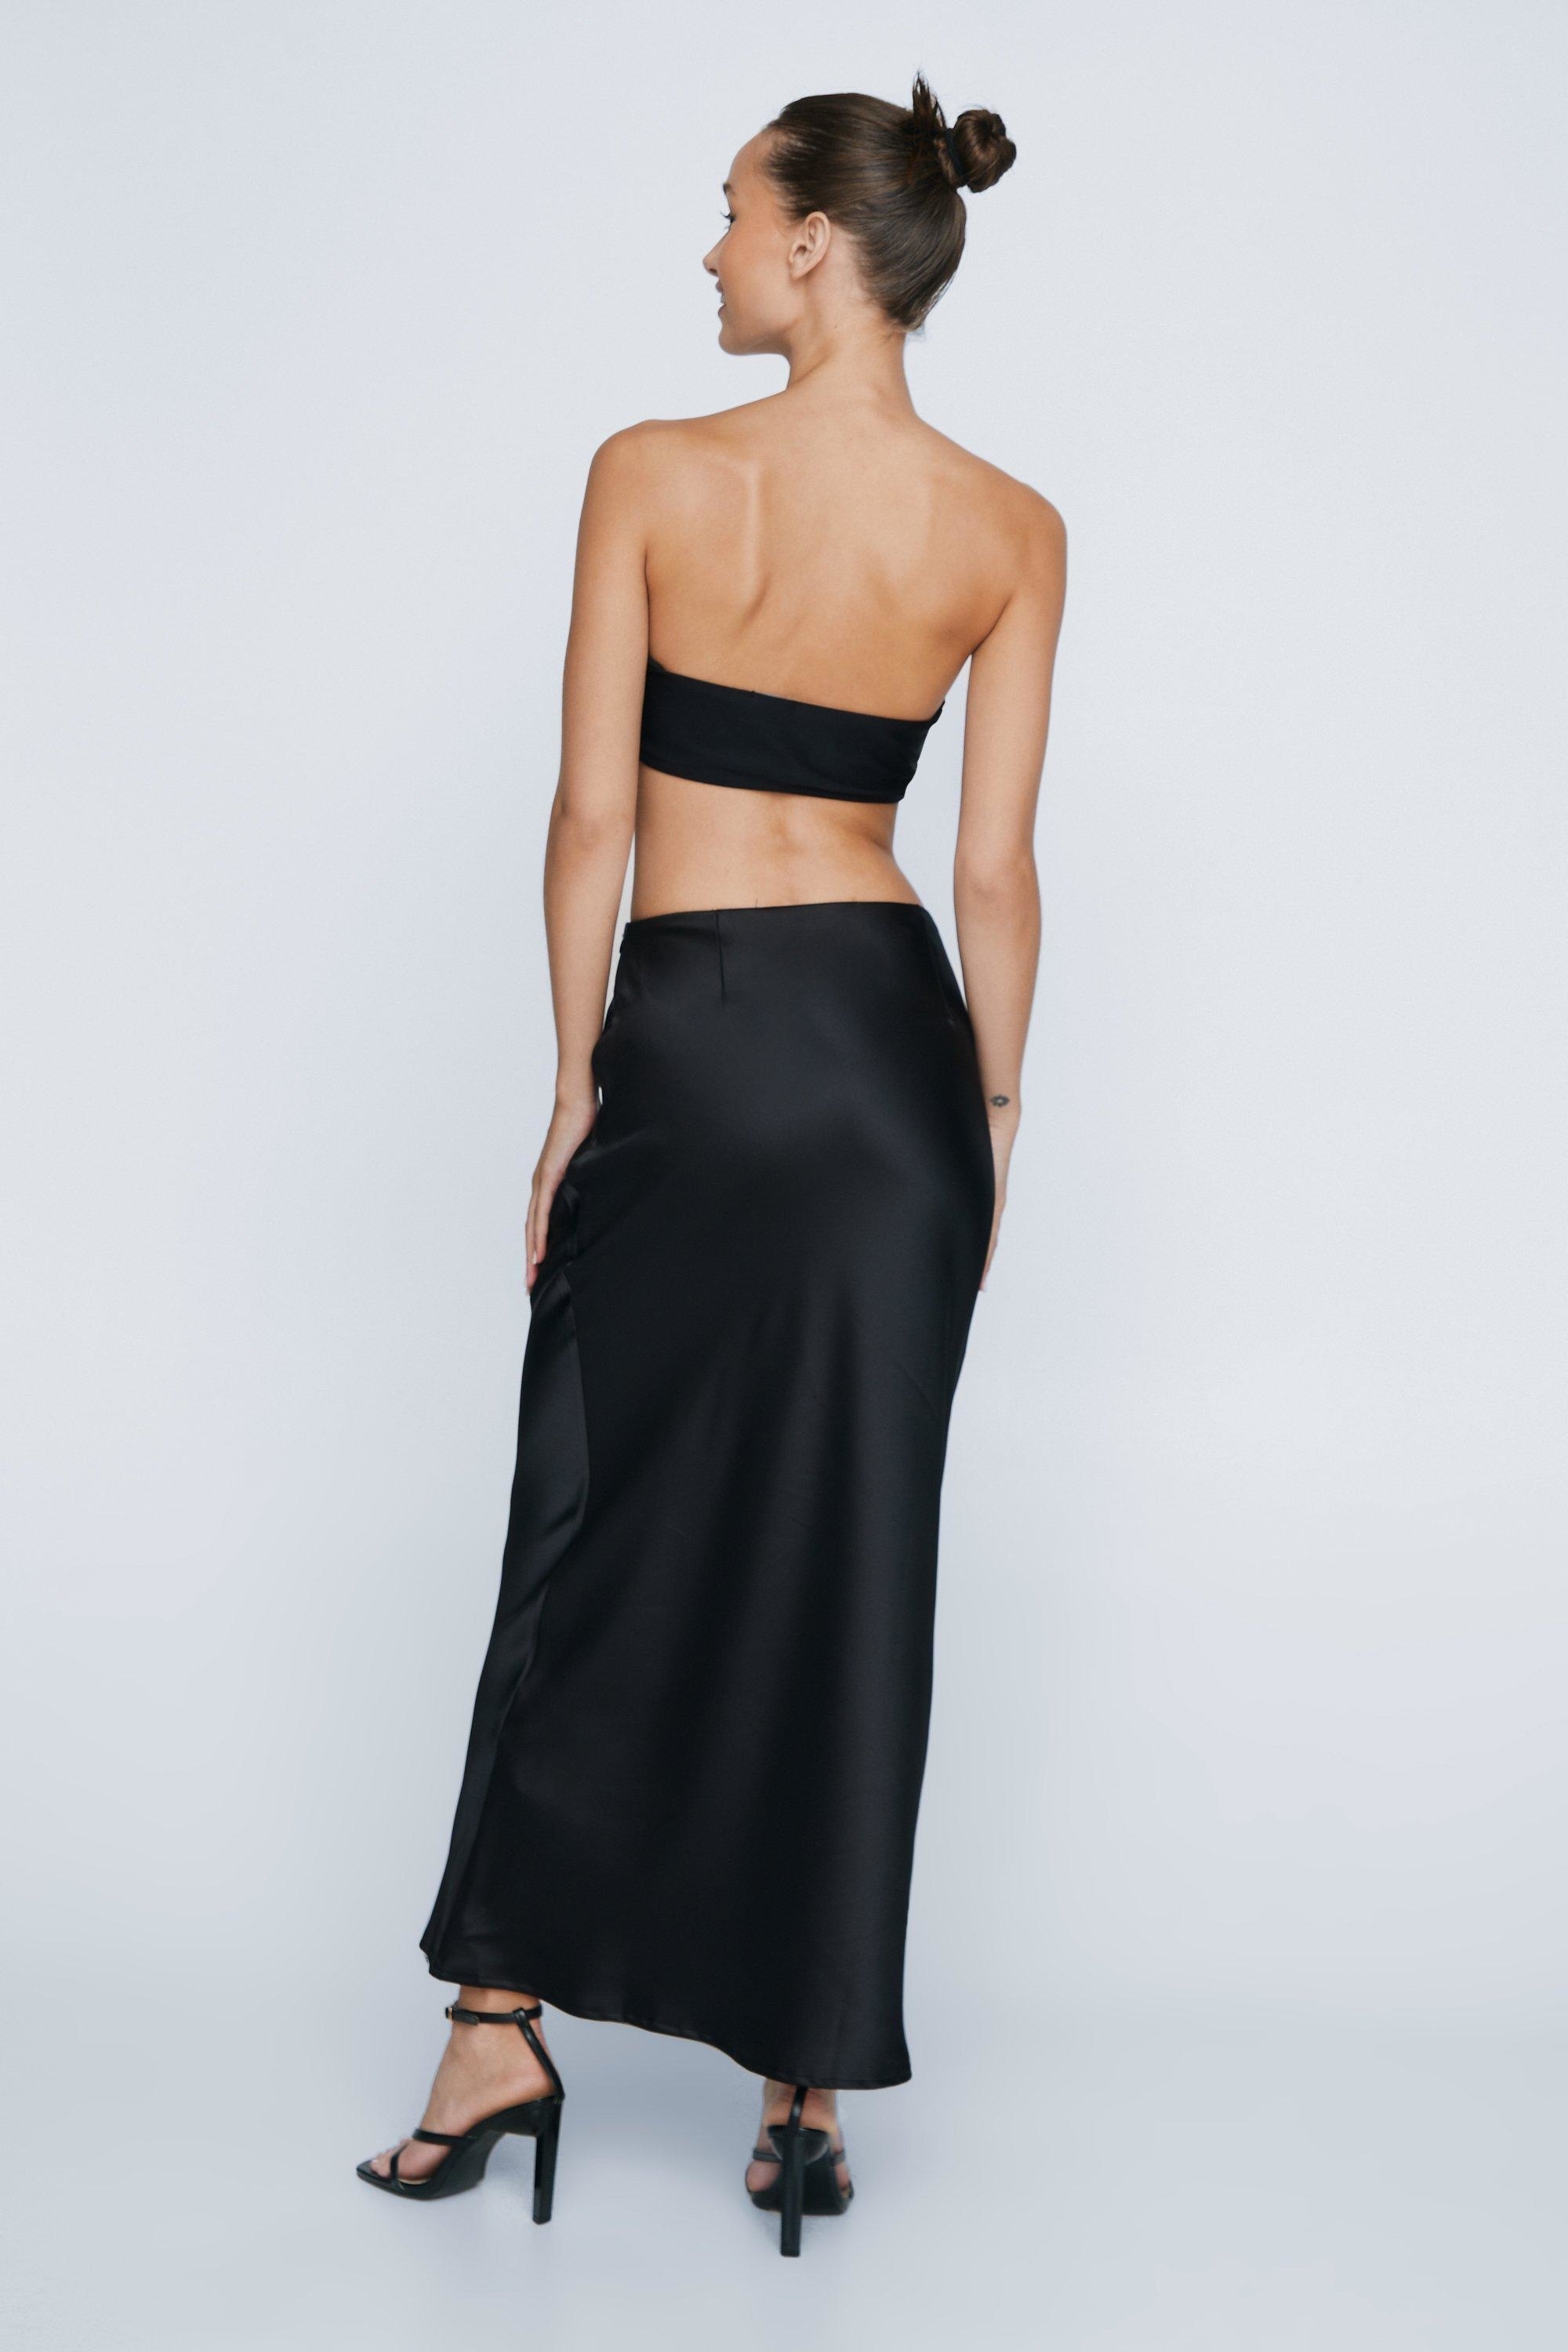 model in a two-piece black ensemble with a crop top and long skirt, viewed from behind